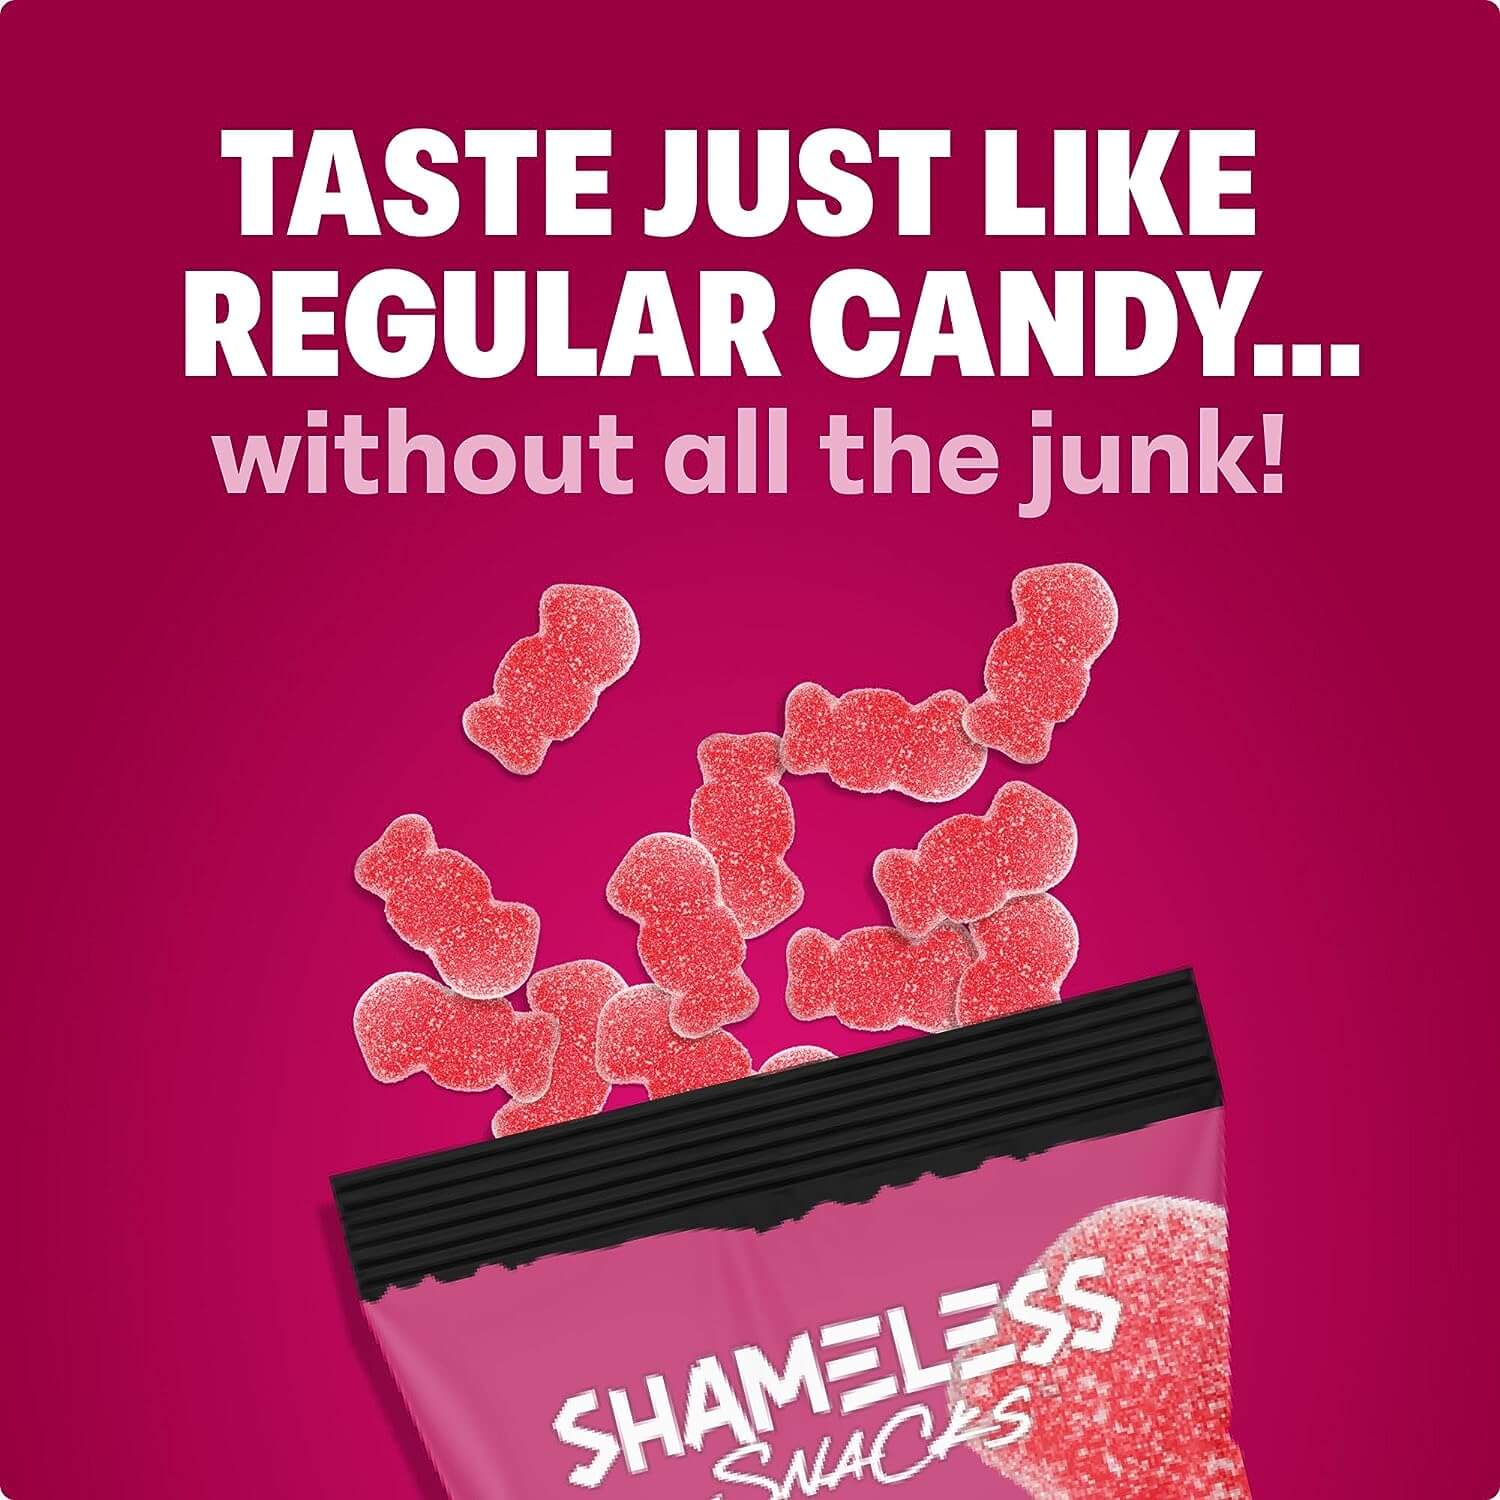 Shameless Snacks Red Raspberry Sour Scouts